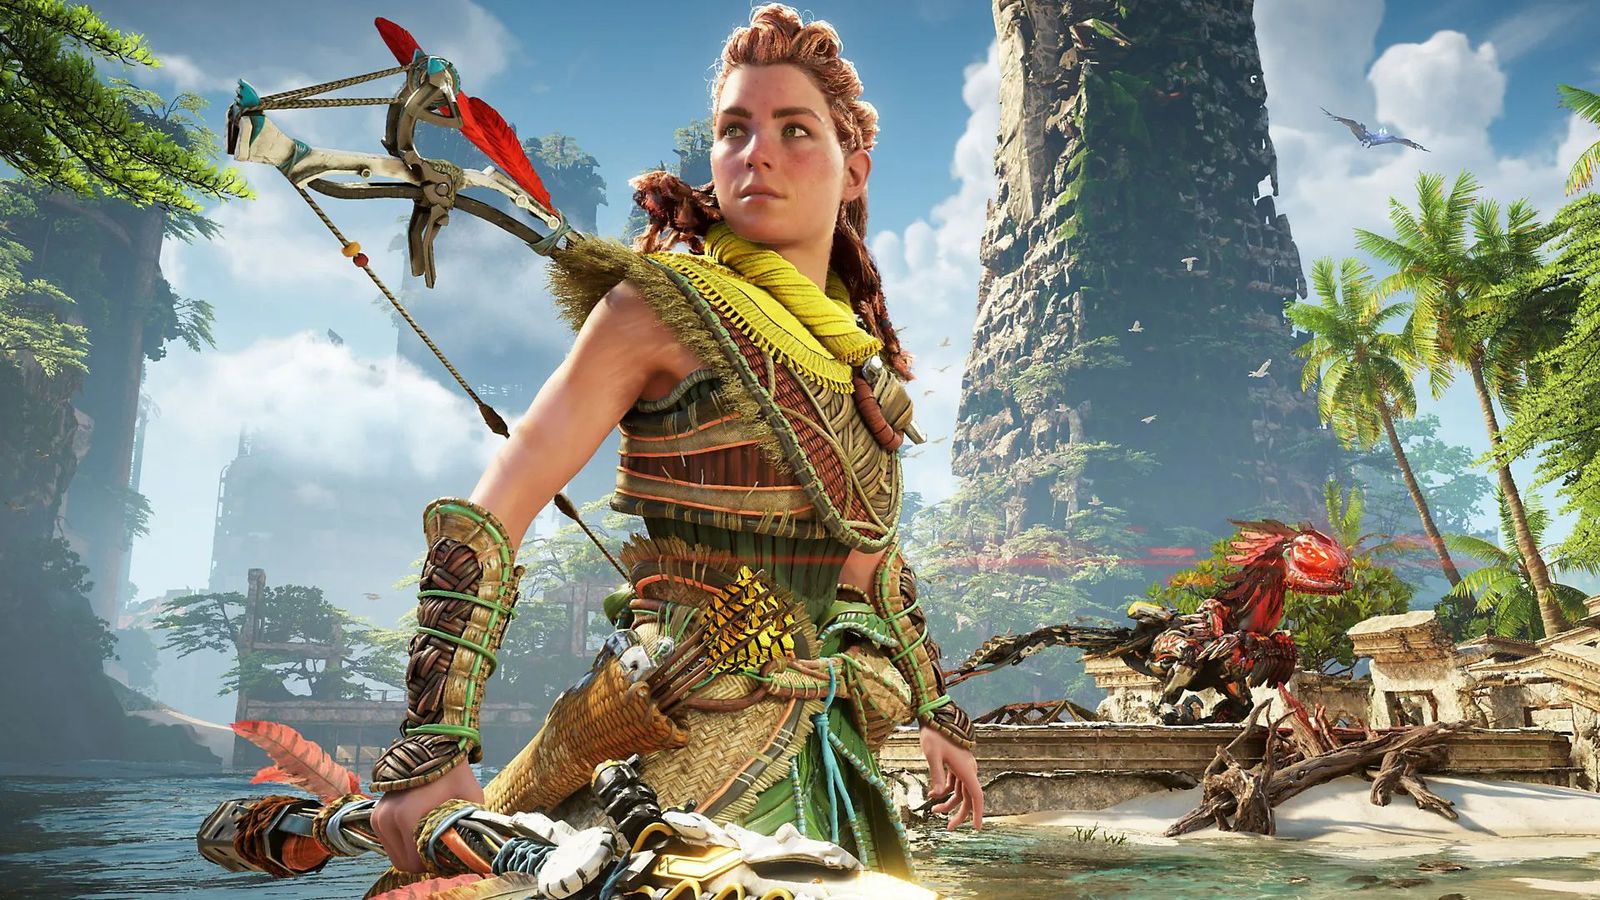 Aloy standing central with a bow in Horizon Forbidden West